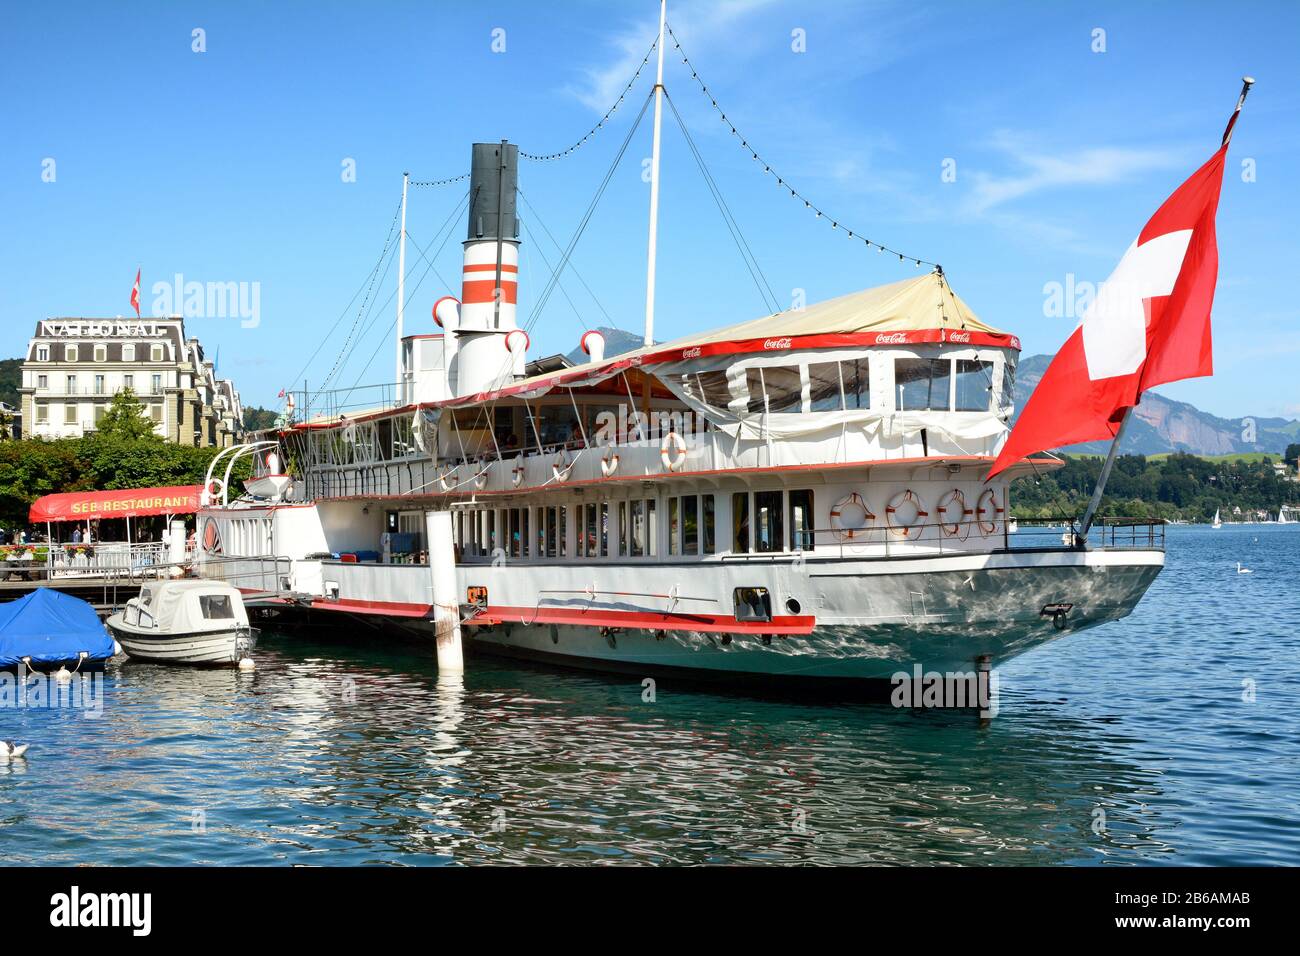 LUCERNE, SWITZERLAND - JULY 3, 2014: The Wilhelm Tell Restaurant. On Lake Lucerne the century old paddle steamer is permanently anchored and a first c Stock Photo